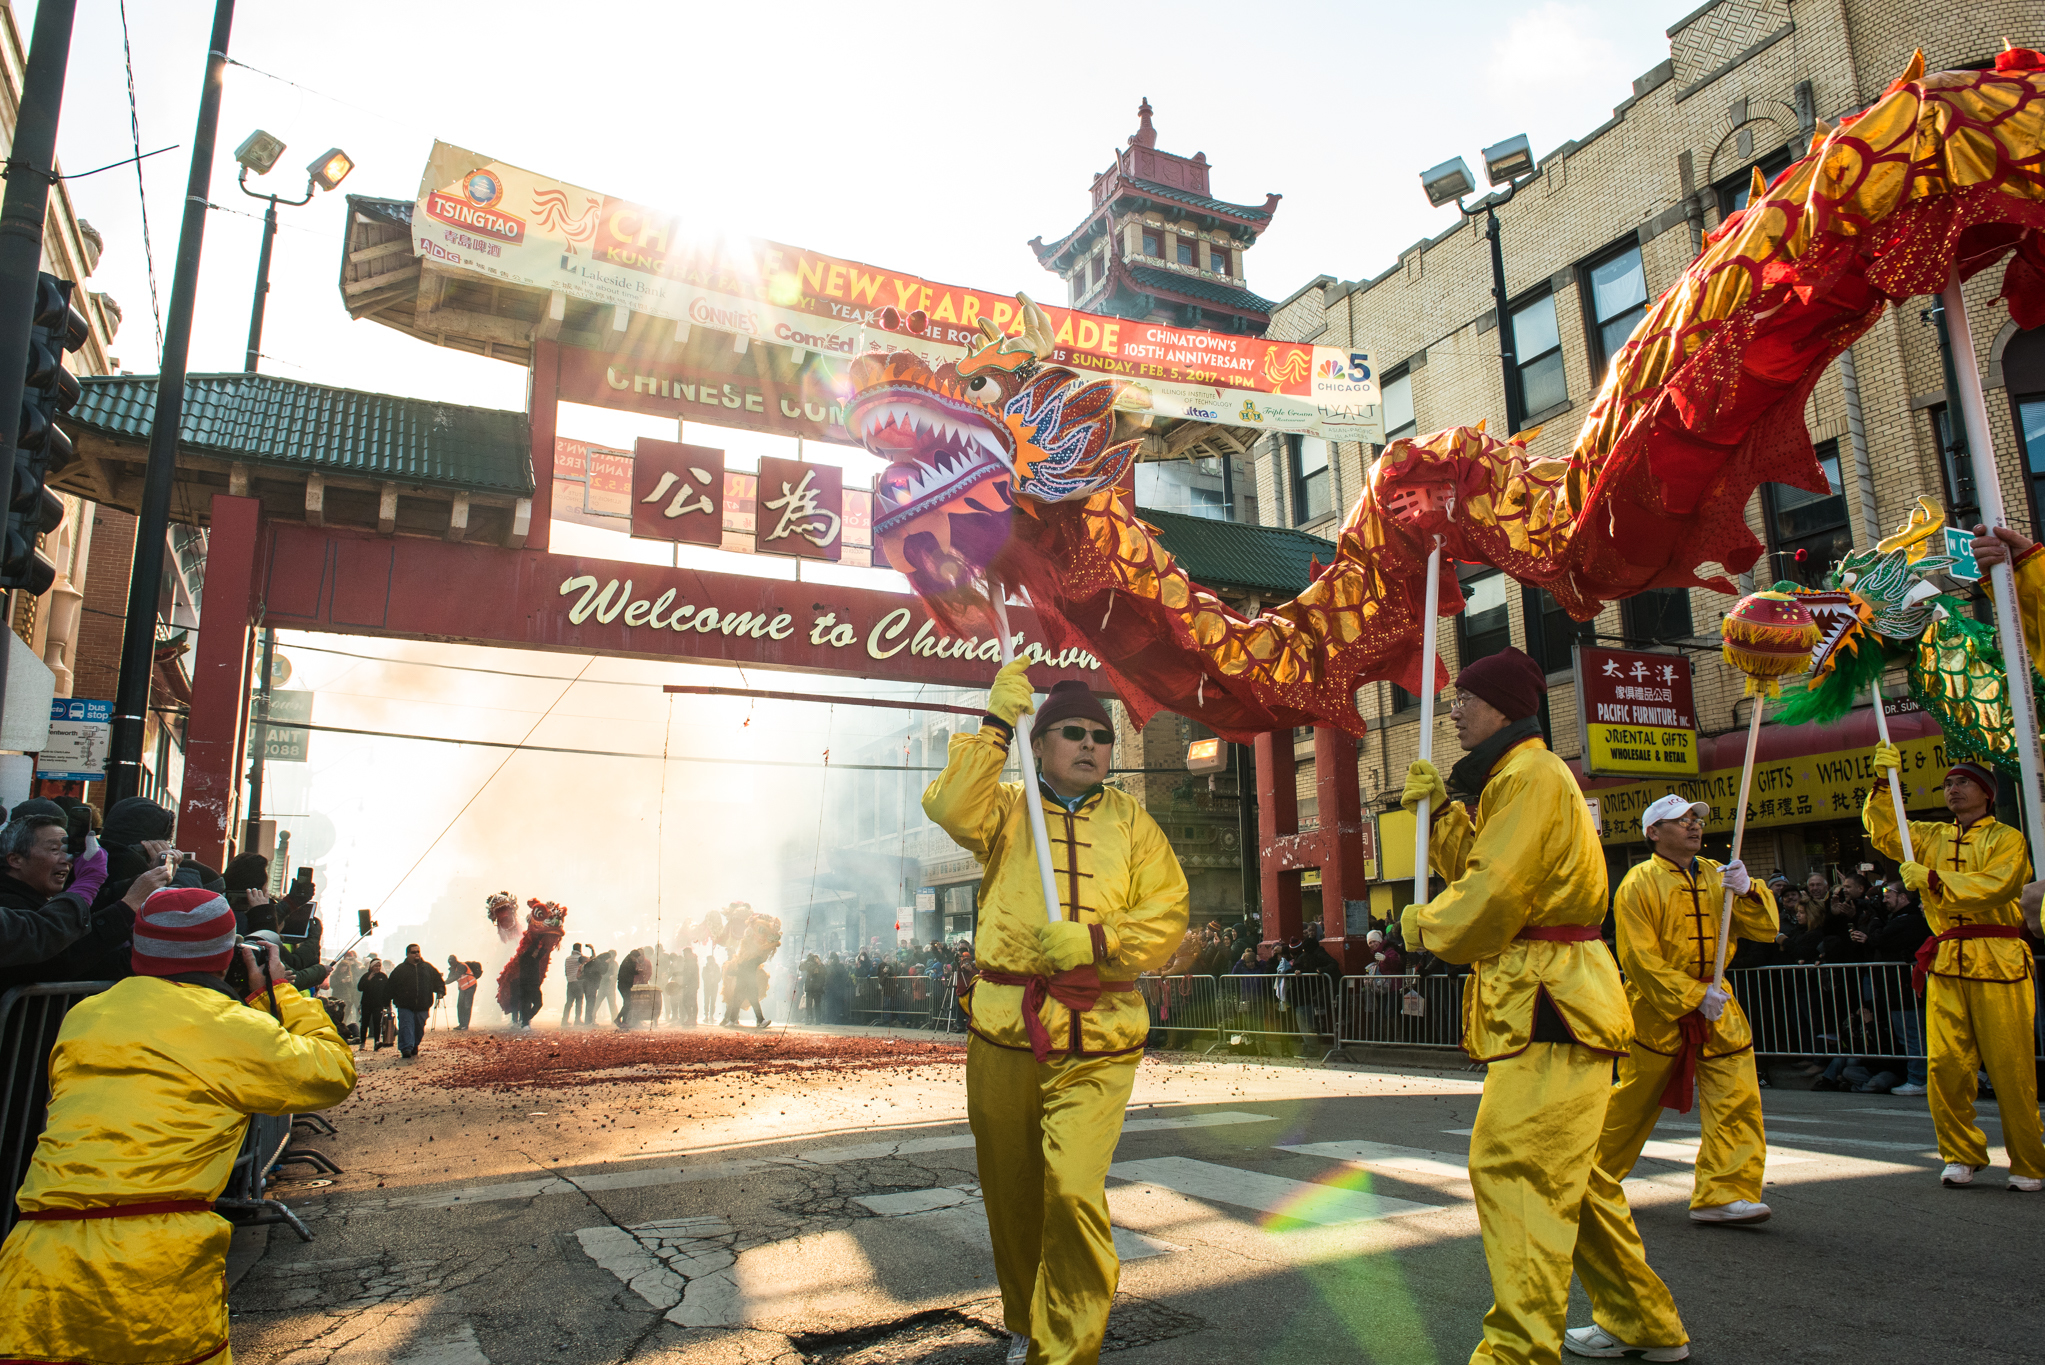 Photos from the Lunar New Year parade in Chinatown